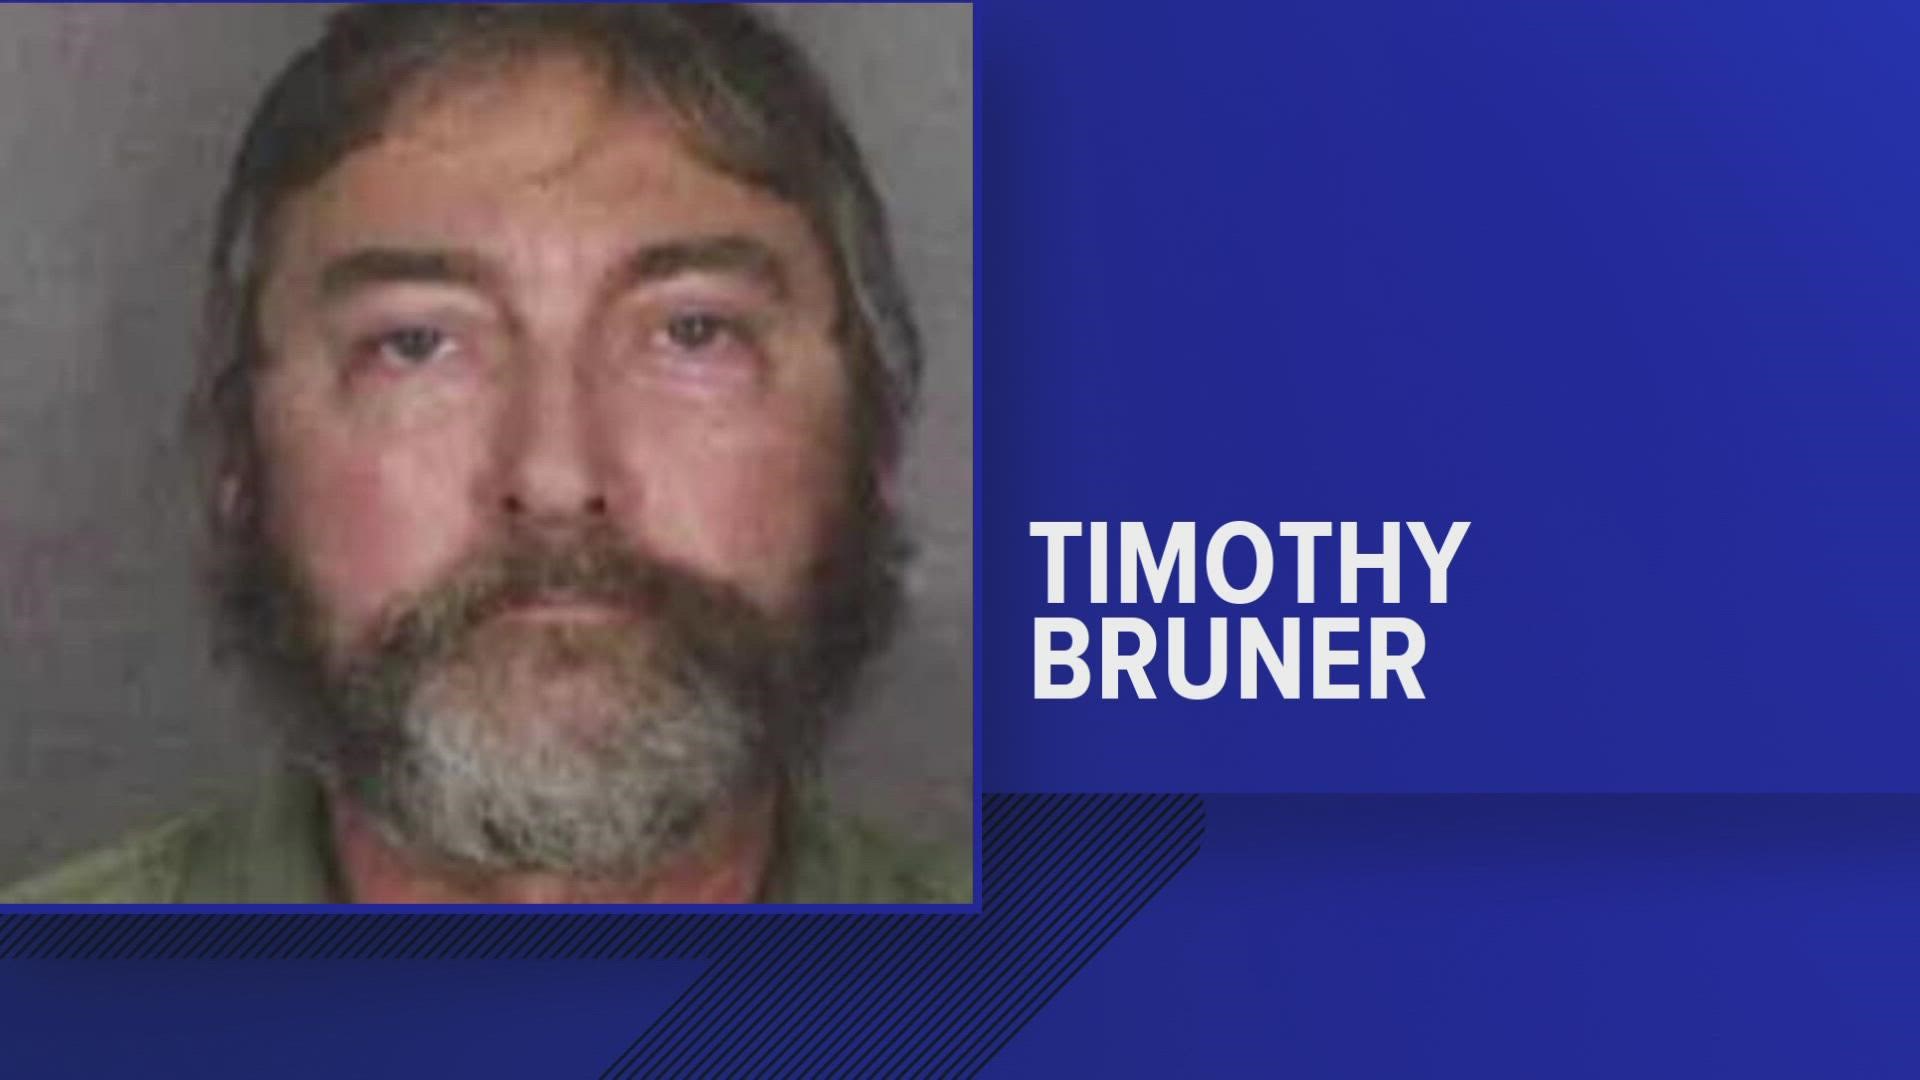 Timothy Bruner was arrested following an investigation where he reportedly used Instagram to commit the crime.